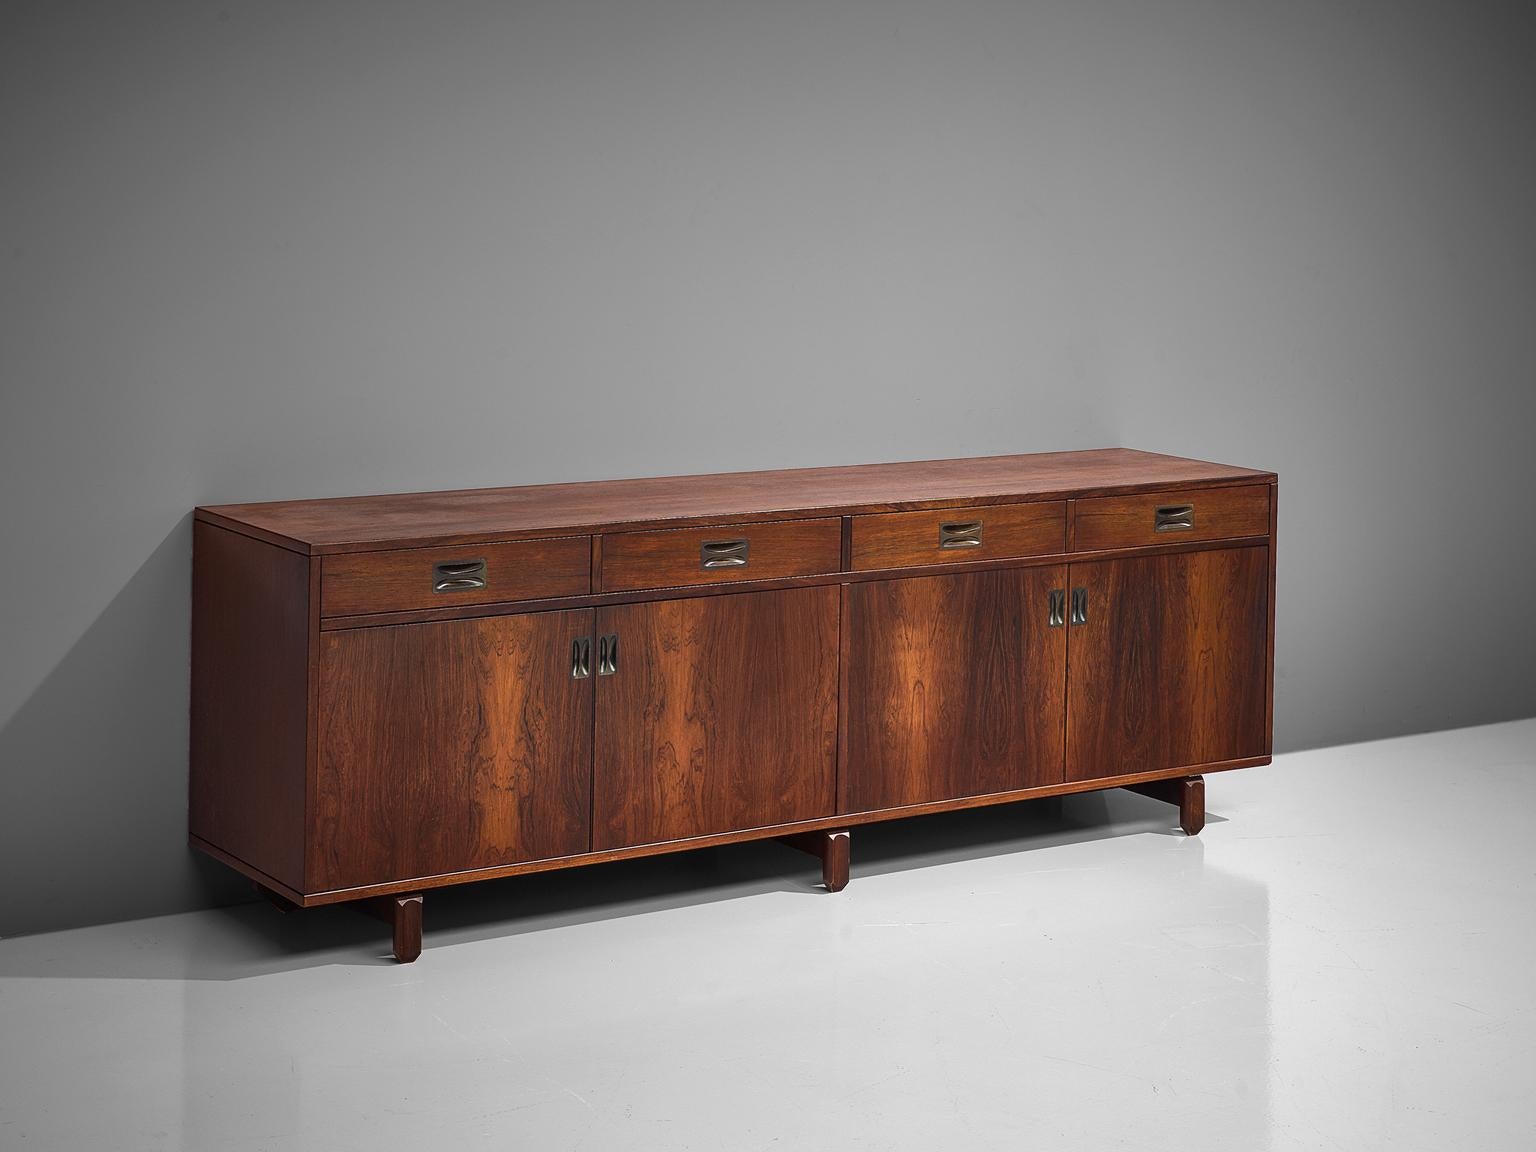 Stilldomus, sideboard, in rosewood and brass, Italy, 1950s.

This exquisitely finished credenza is executed in rosewood. Almost the whole of the interior and the back of this piece are finished with rosewood veneer too, making this a piece of high